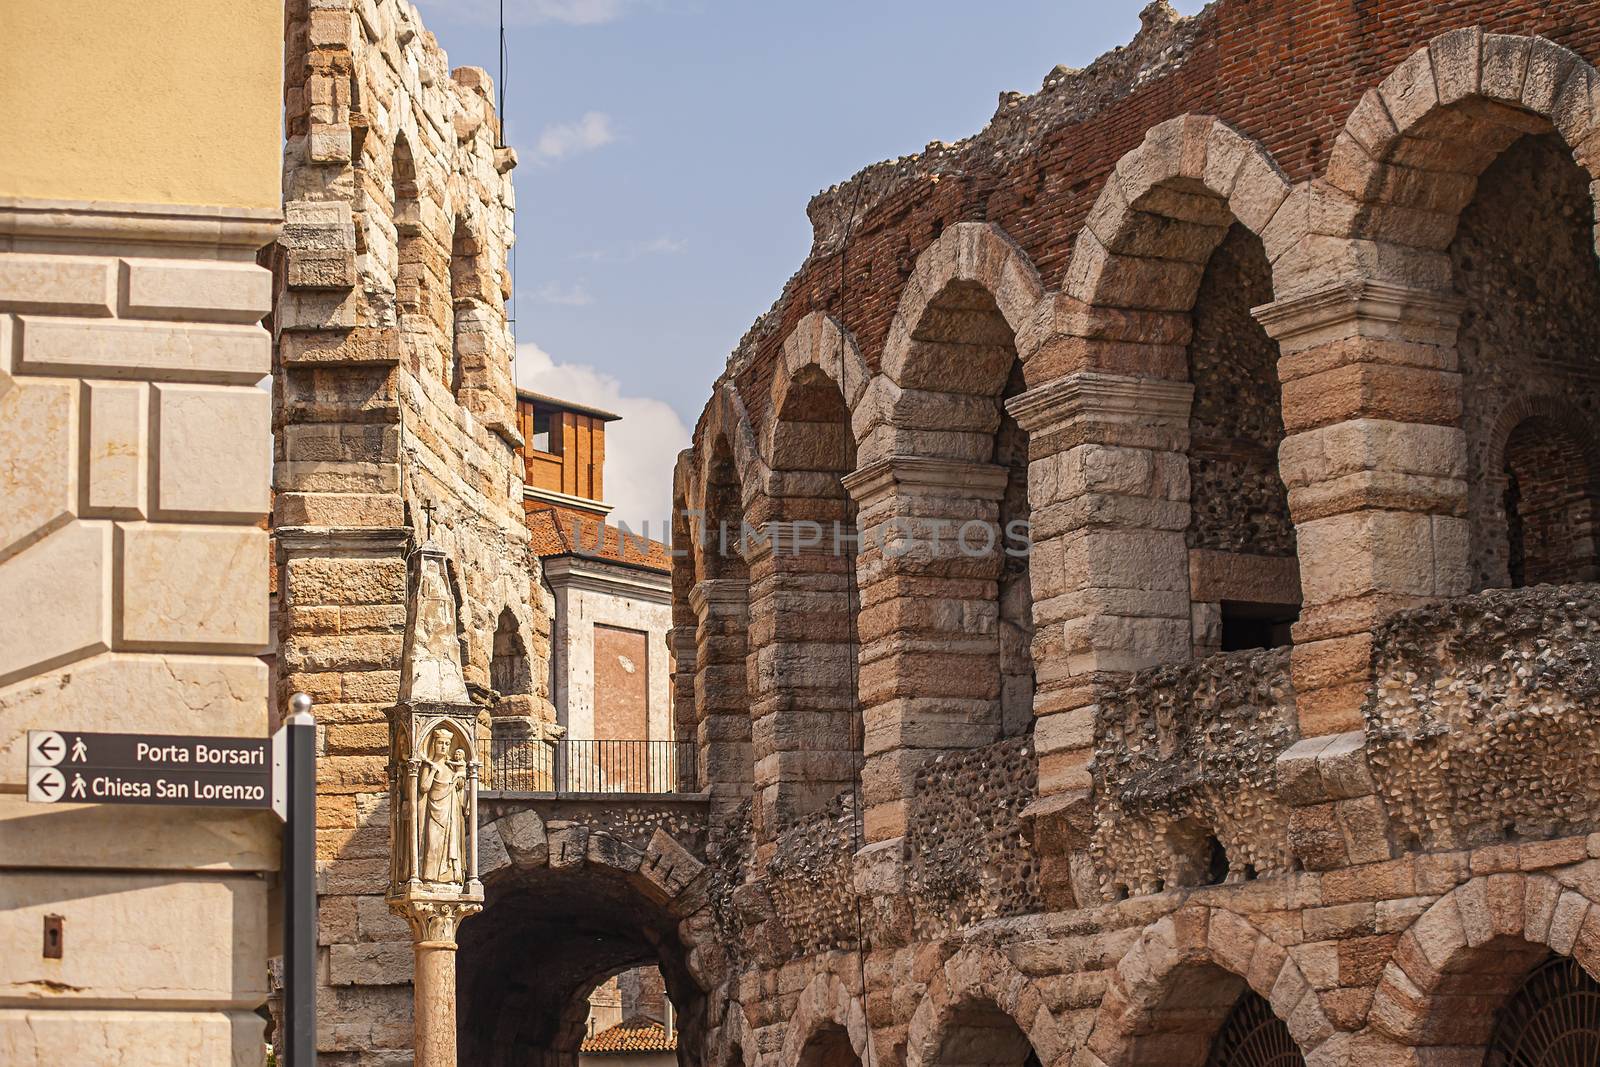 Detail of Arena di Verona, the most famous ancient building in the city